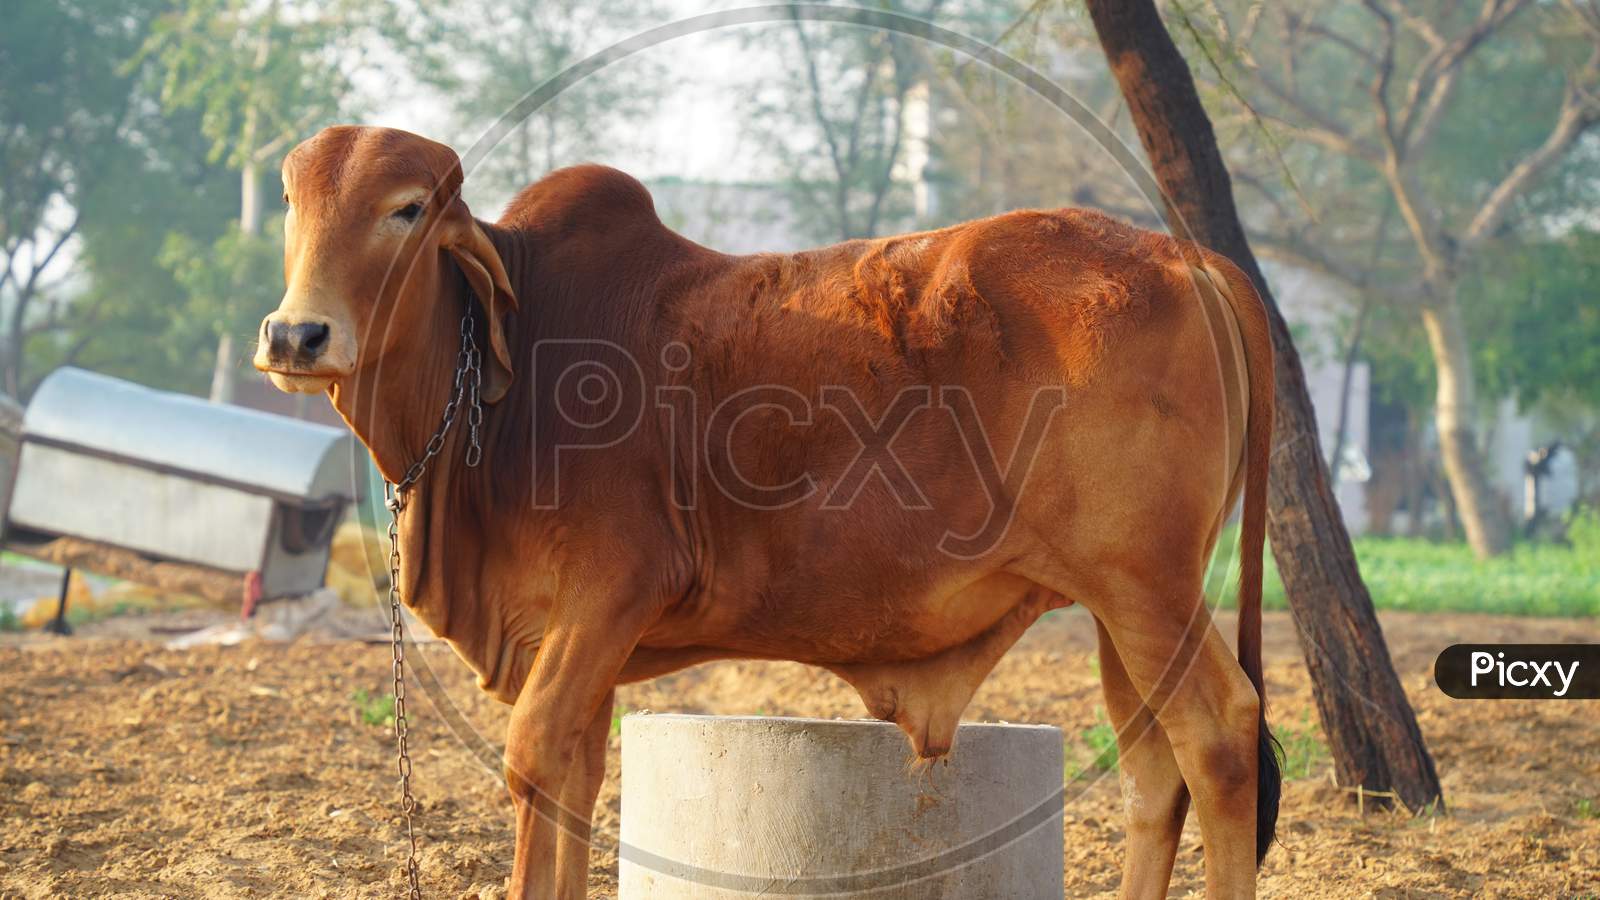 Side View Shot Of Brown Indian Bull Shaking Sunlight In Cold Winter Season. Gir Bull With Curious Eyesight Against Camera.